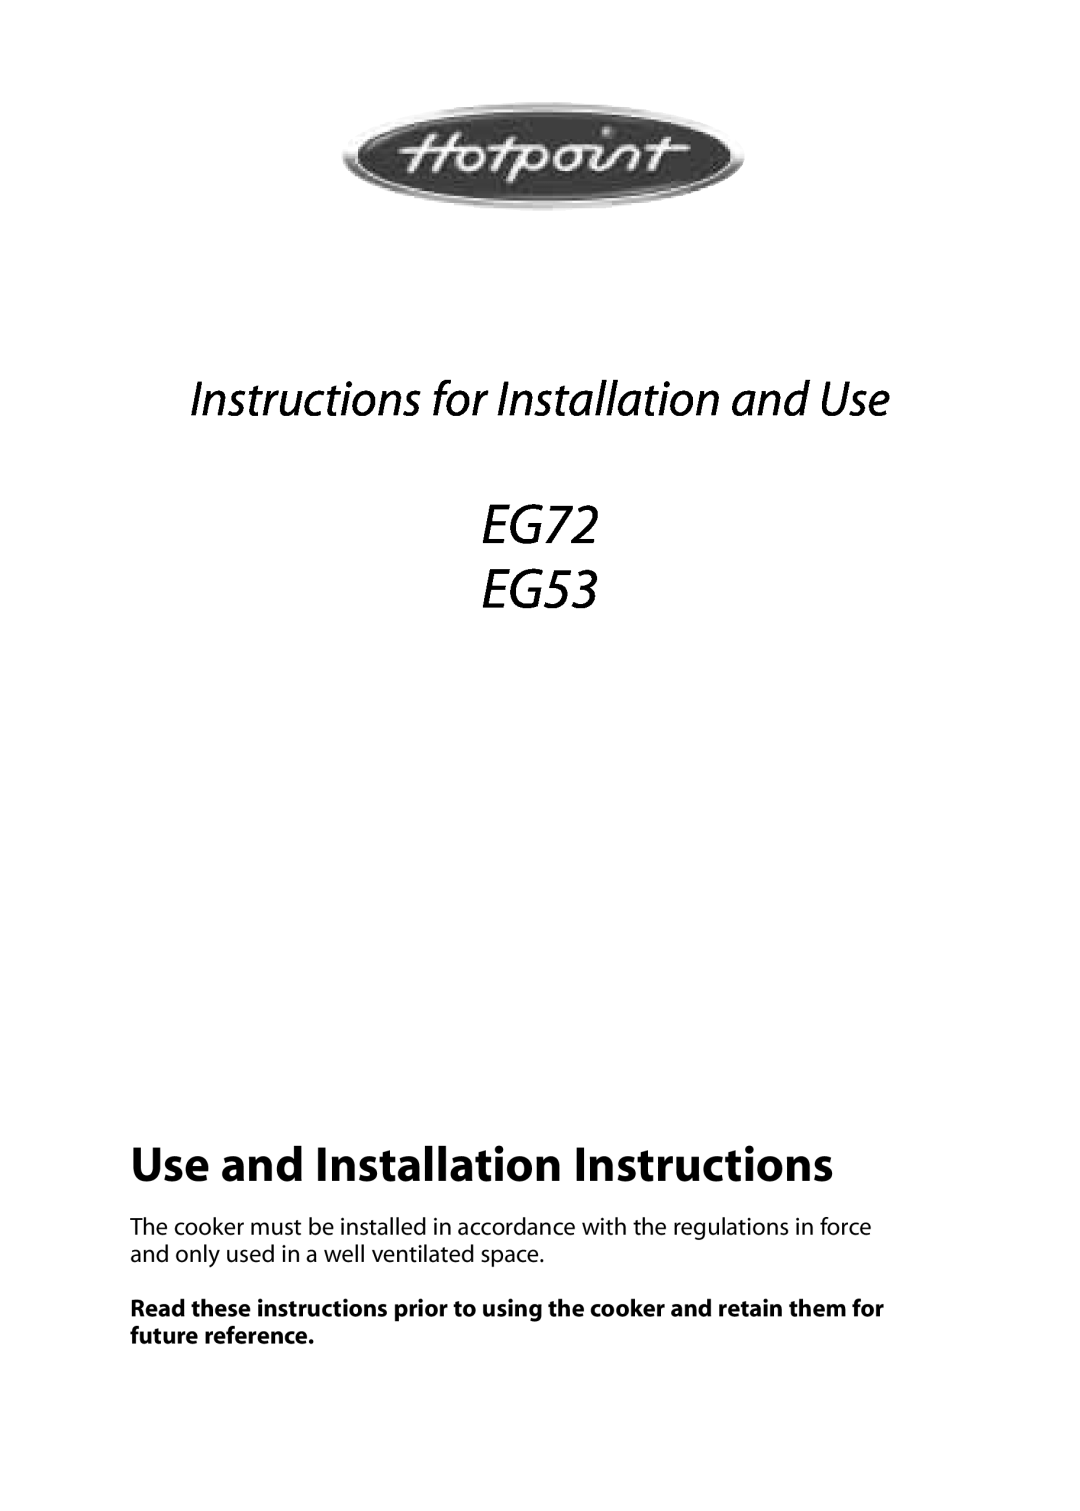 Hotpoint installation instructions Use and Installation Instructions, EG72 EG53, Instructions for Installation and Use 